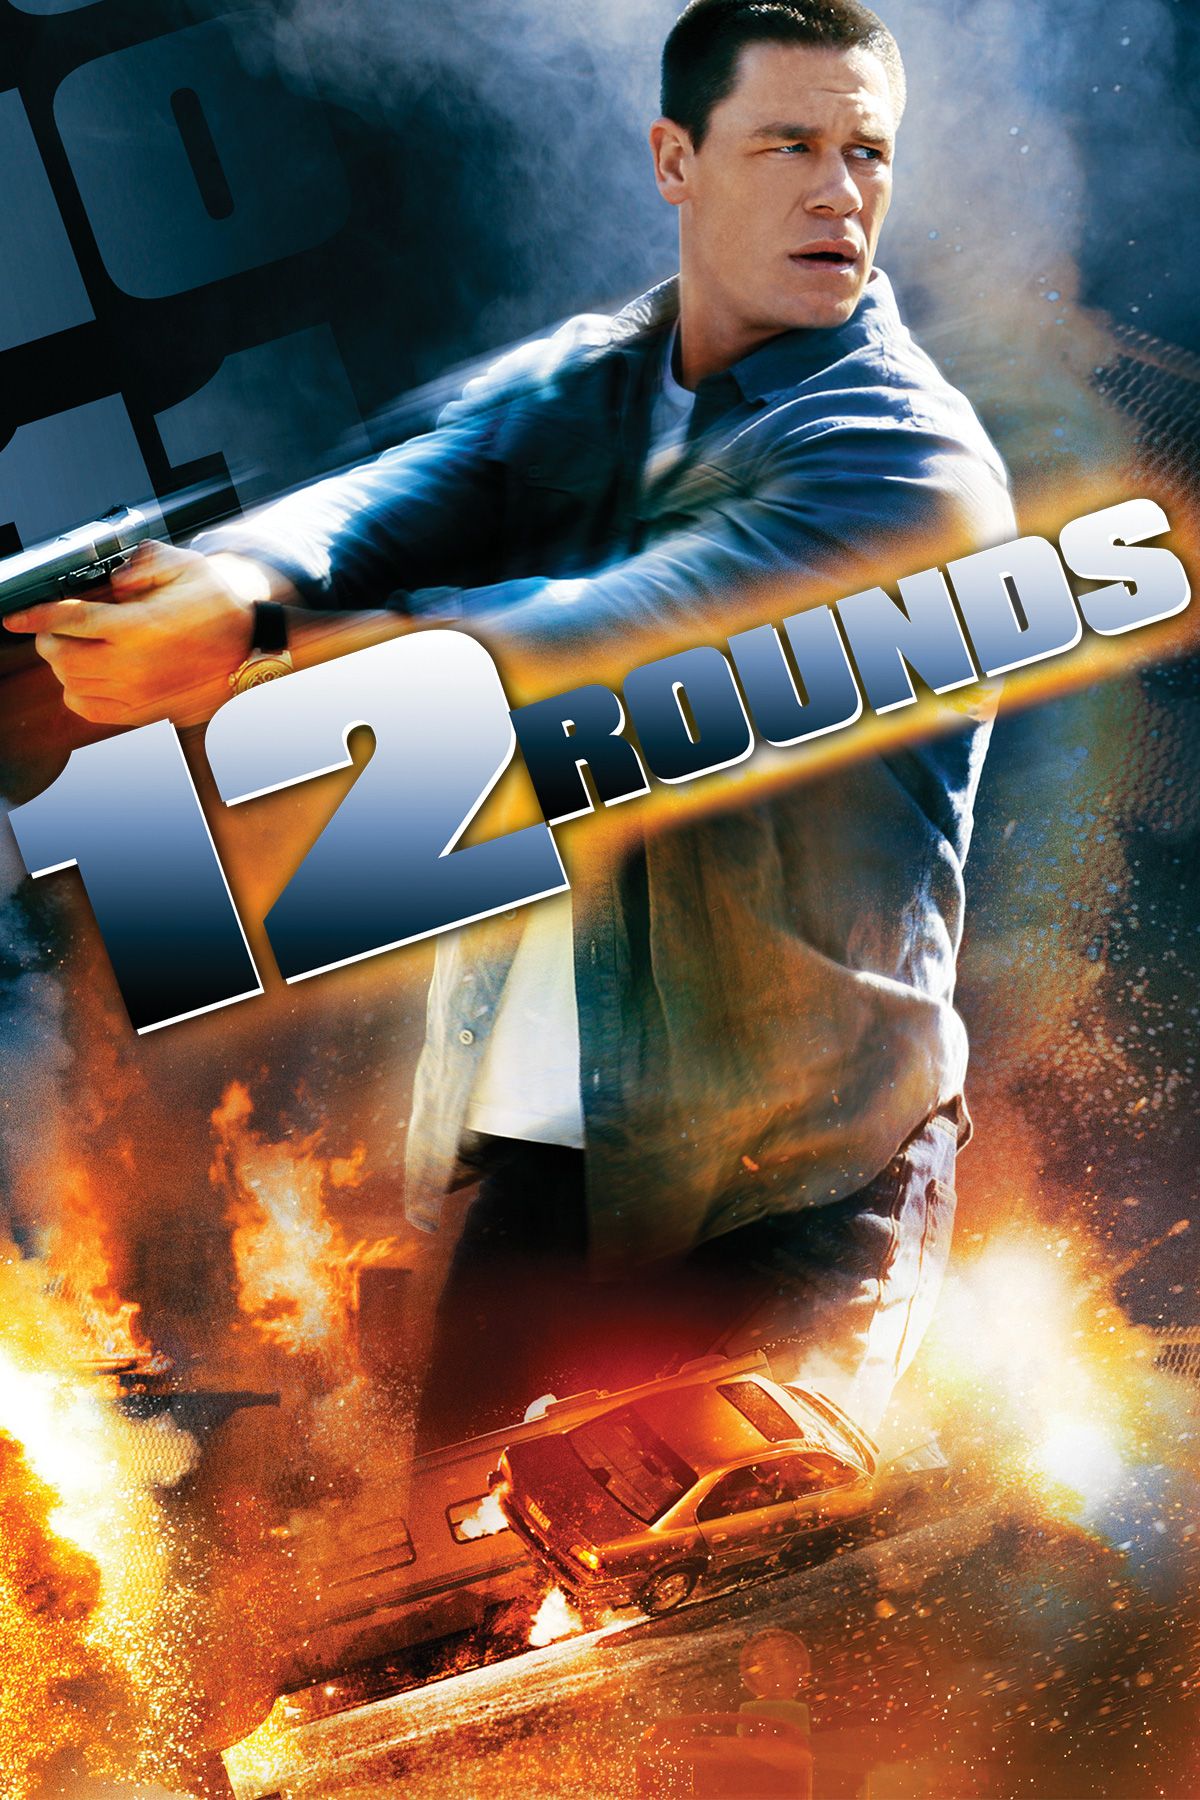 12 Rounds (Unrated), Full Movie